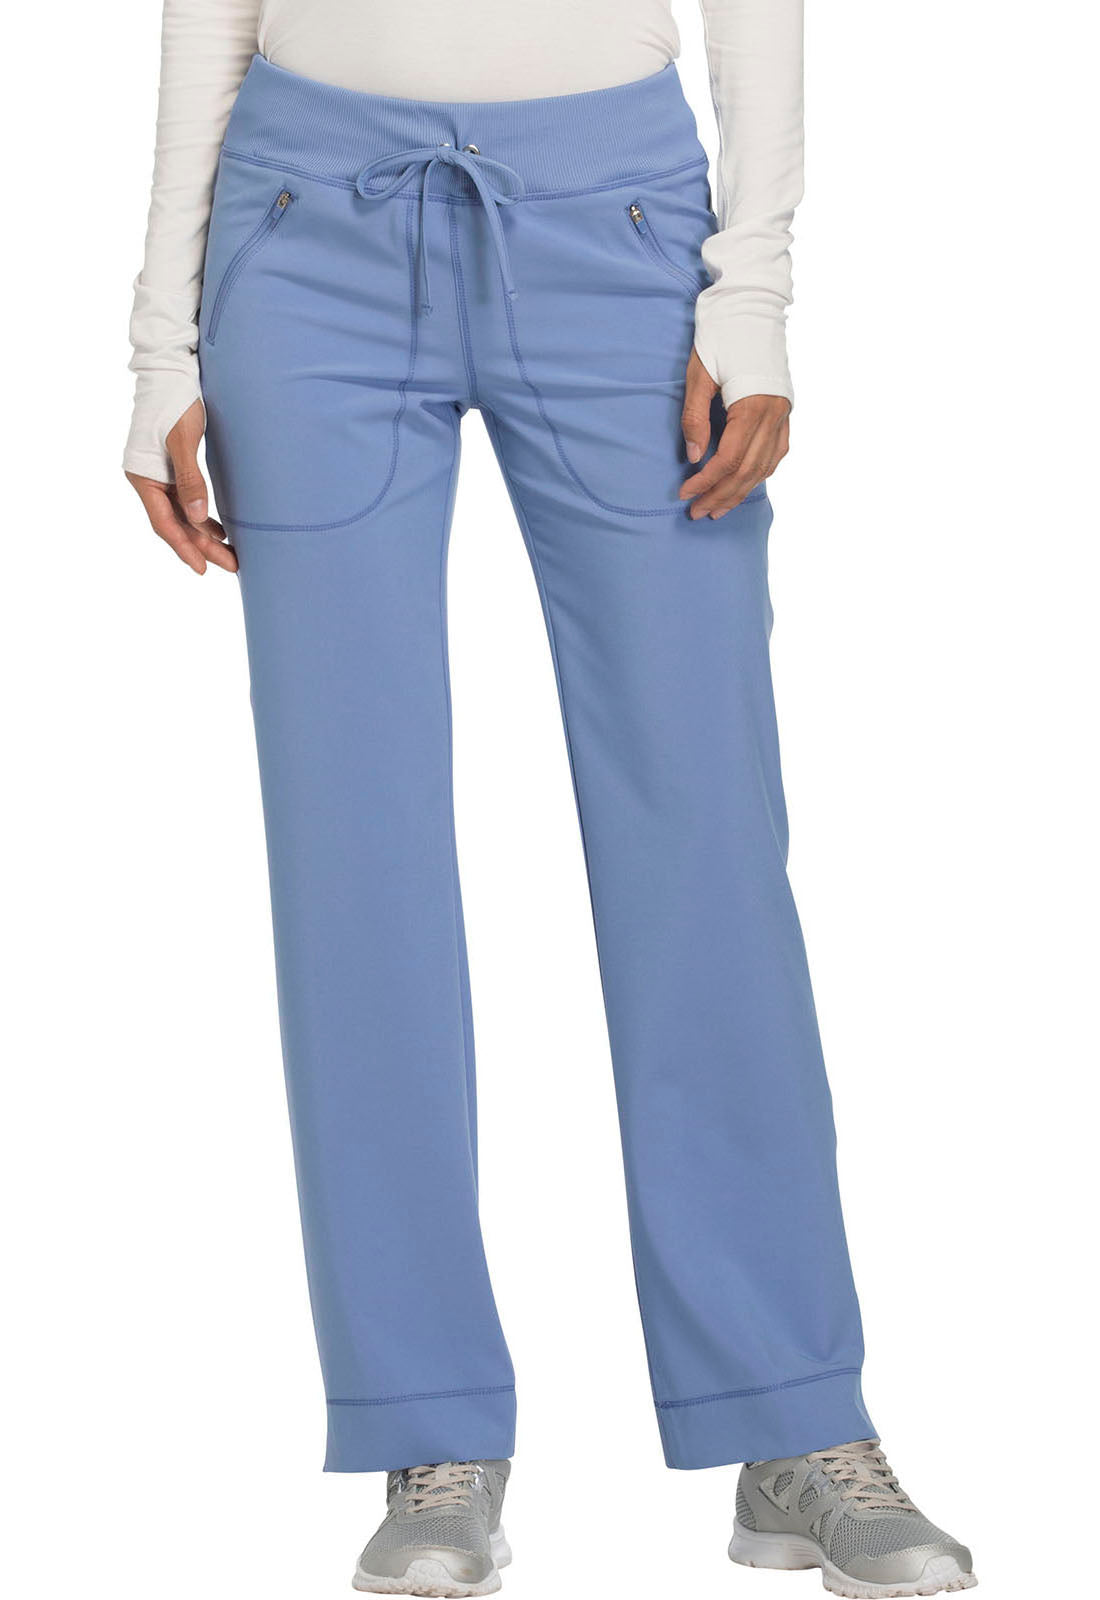 Mid Rise Tapered Leg Drawstring Pants Petite and Tall